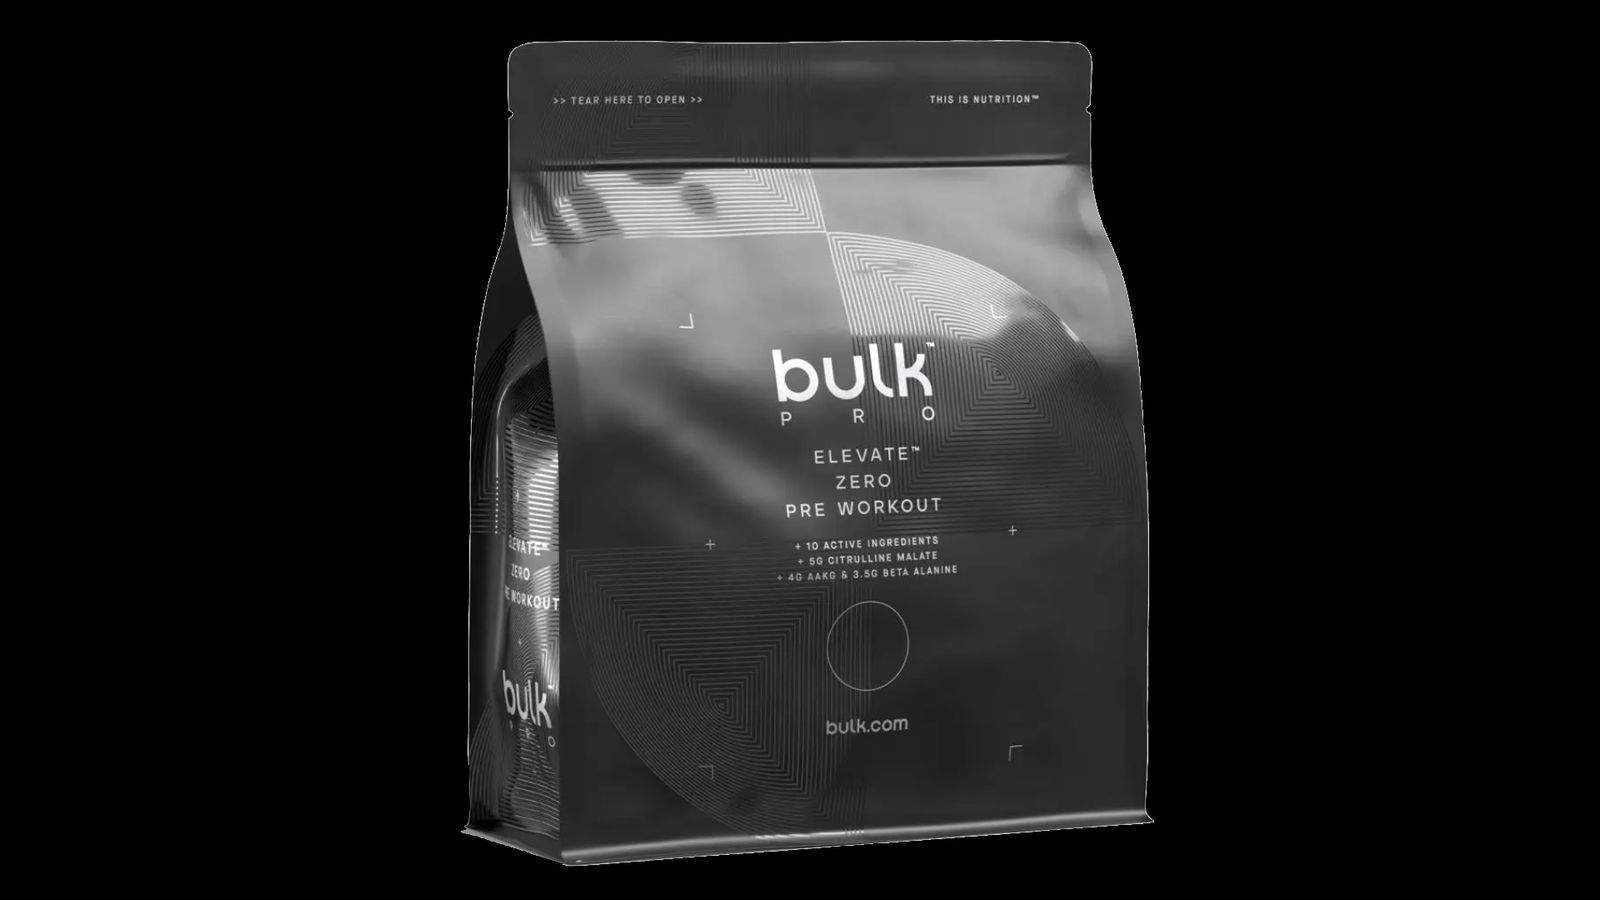 Bulk Pro Elevate Zero product image of a black packaging pre-workout